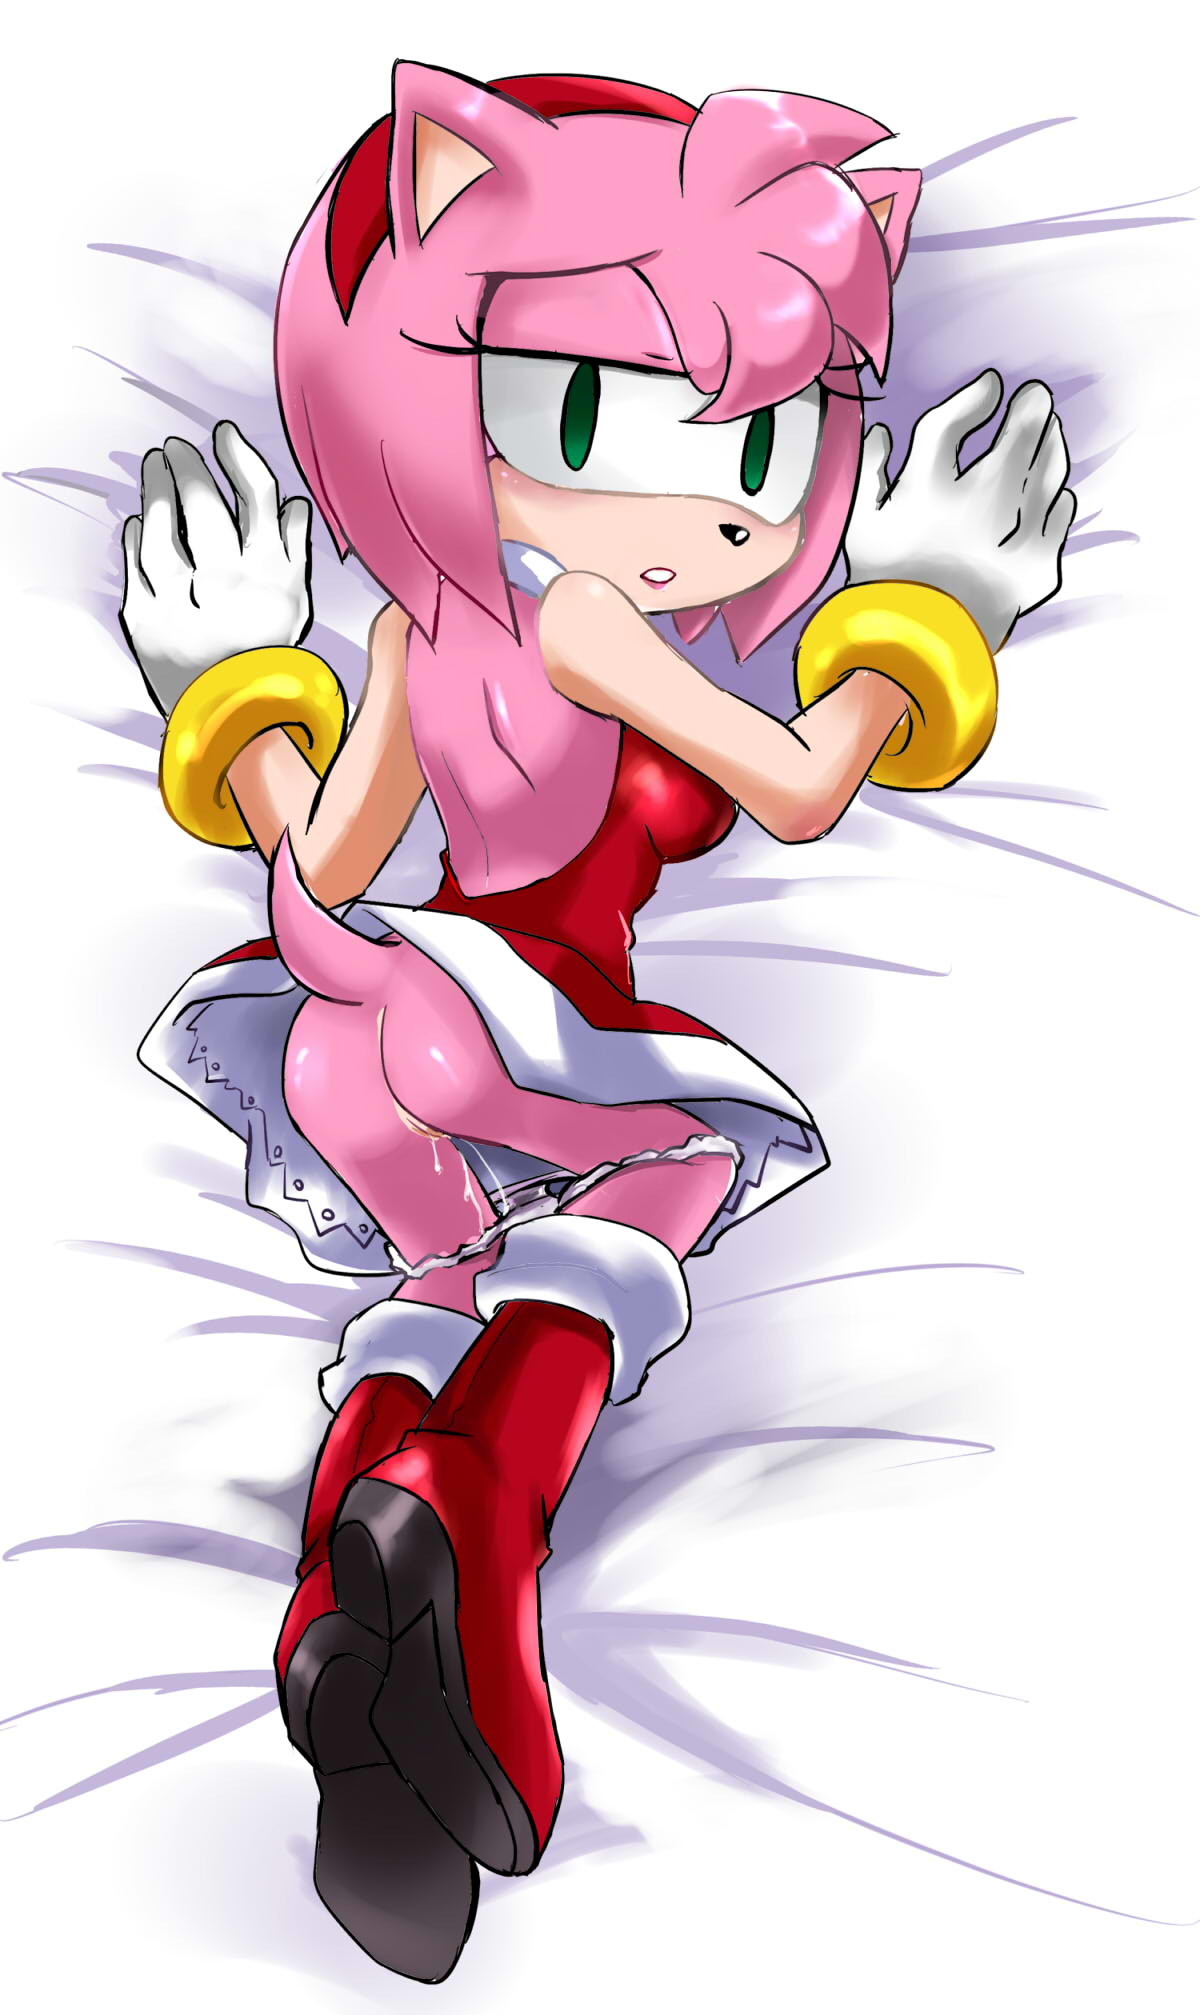 Read Rule 34 Collection Amy Rose 1 Hentai Online Porn Manga And Doujinshi